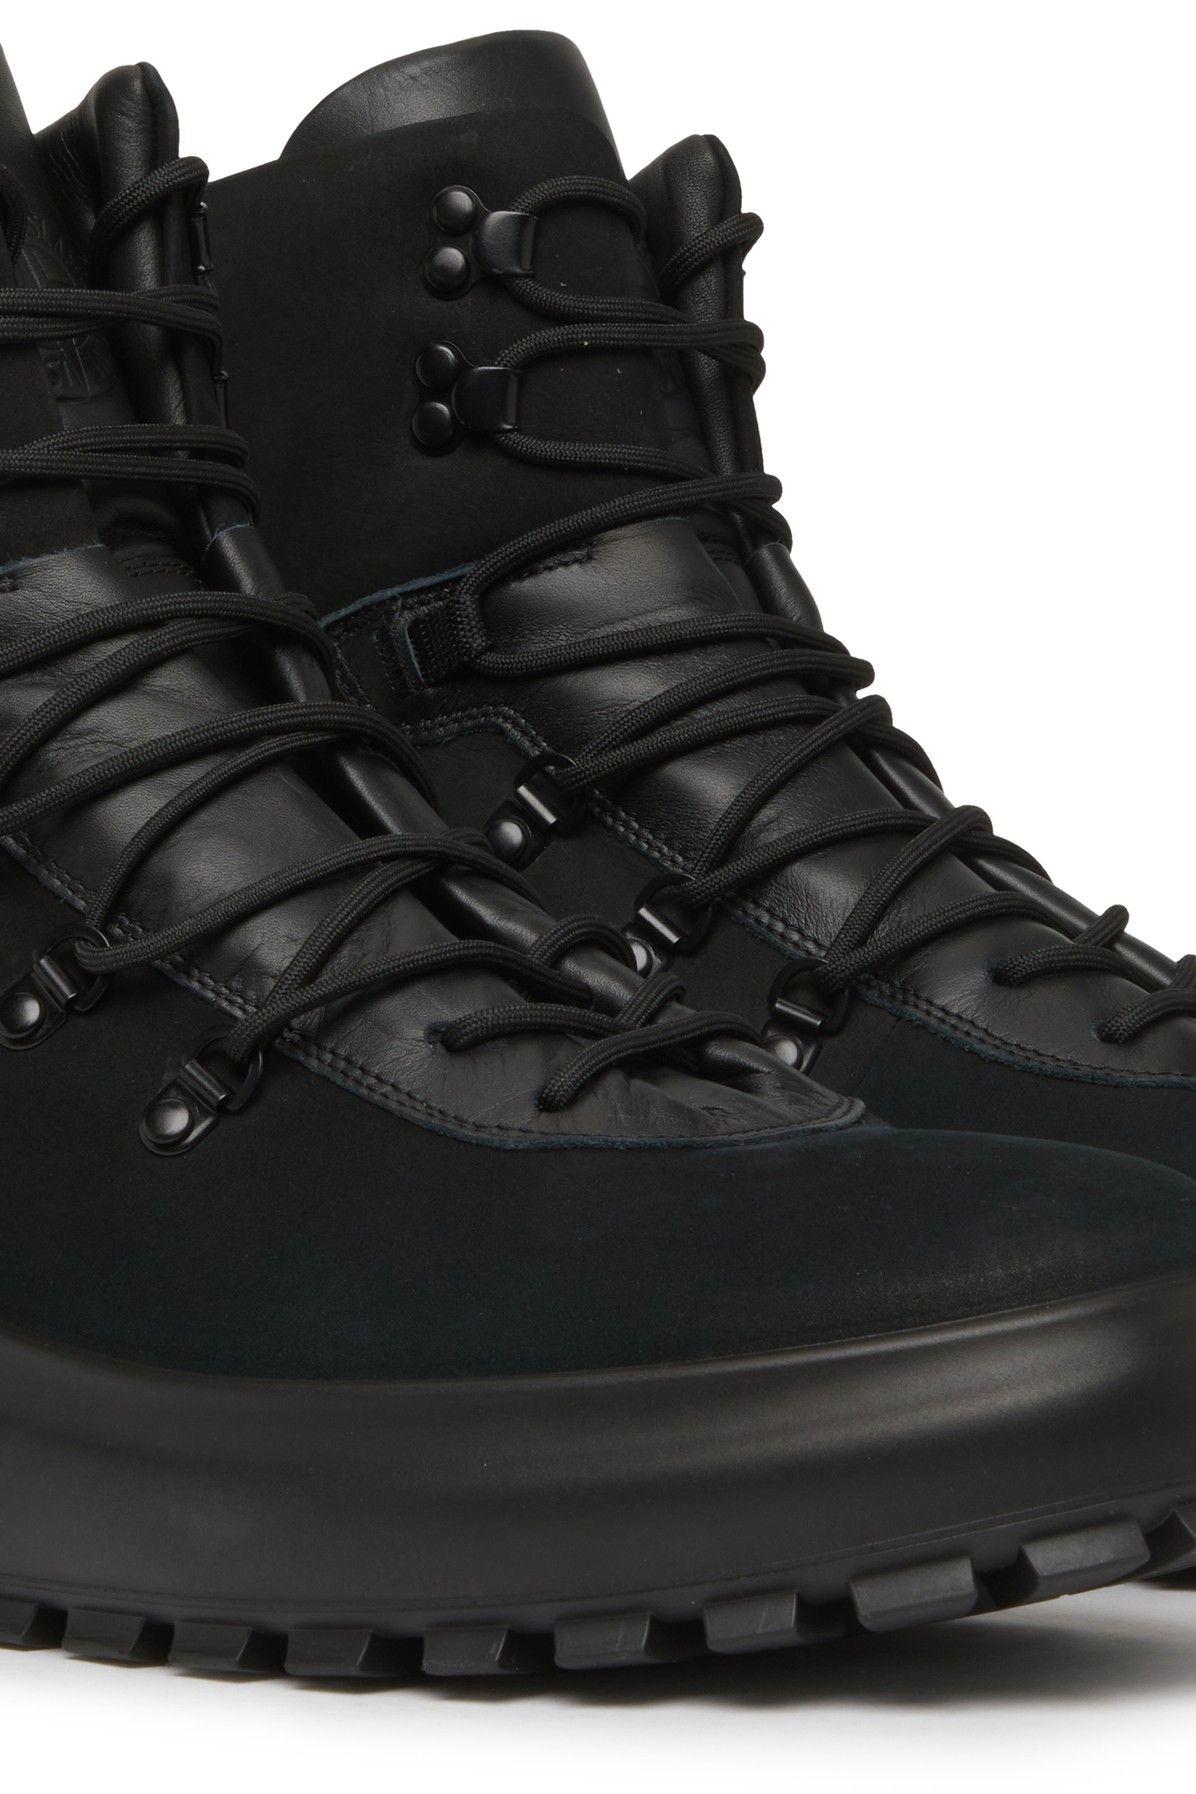 Stone Island Hiking Boots in Black for Men | Lyst